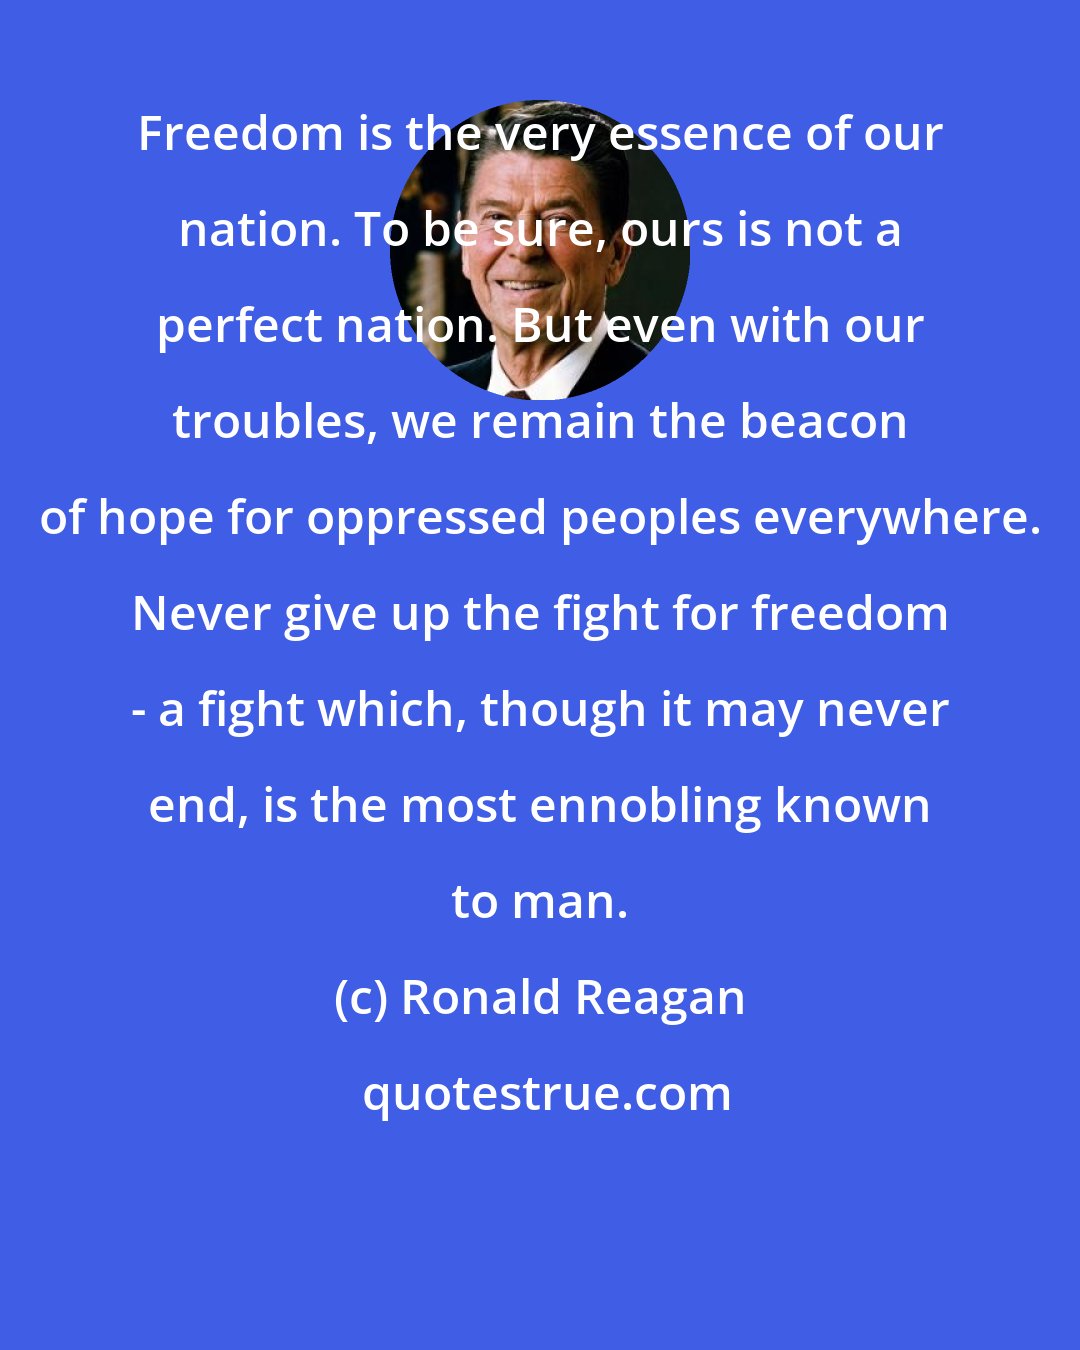 Ronald Reagan: Freedom is the very essence of our nation. To be sure, ours is not a perfect nation. But even with our troubles, we remain the beacon of hope for oppressed peoples everywhere. Never give up the fight for freedom - a fight which, though it may never end, is the most ennobling known to man.